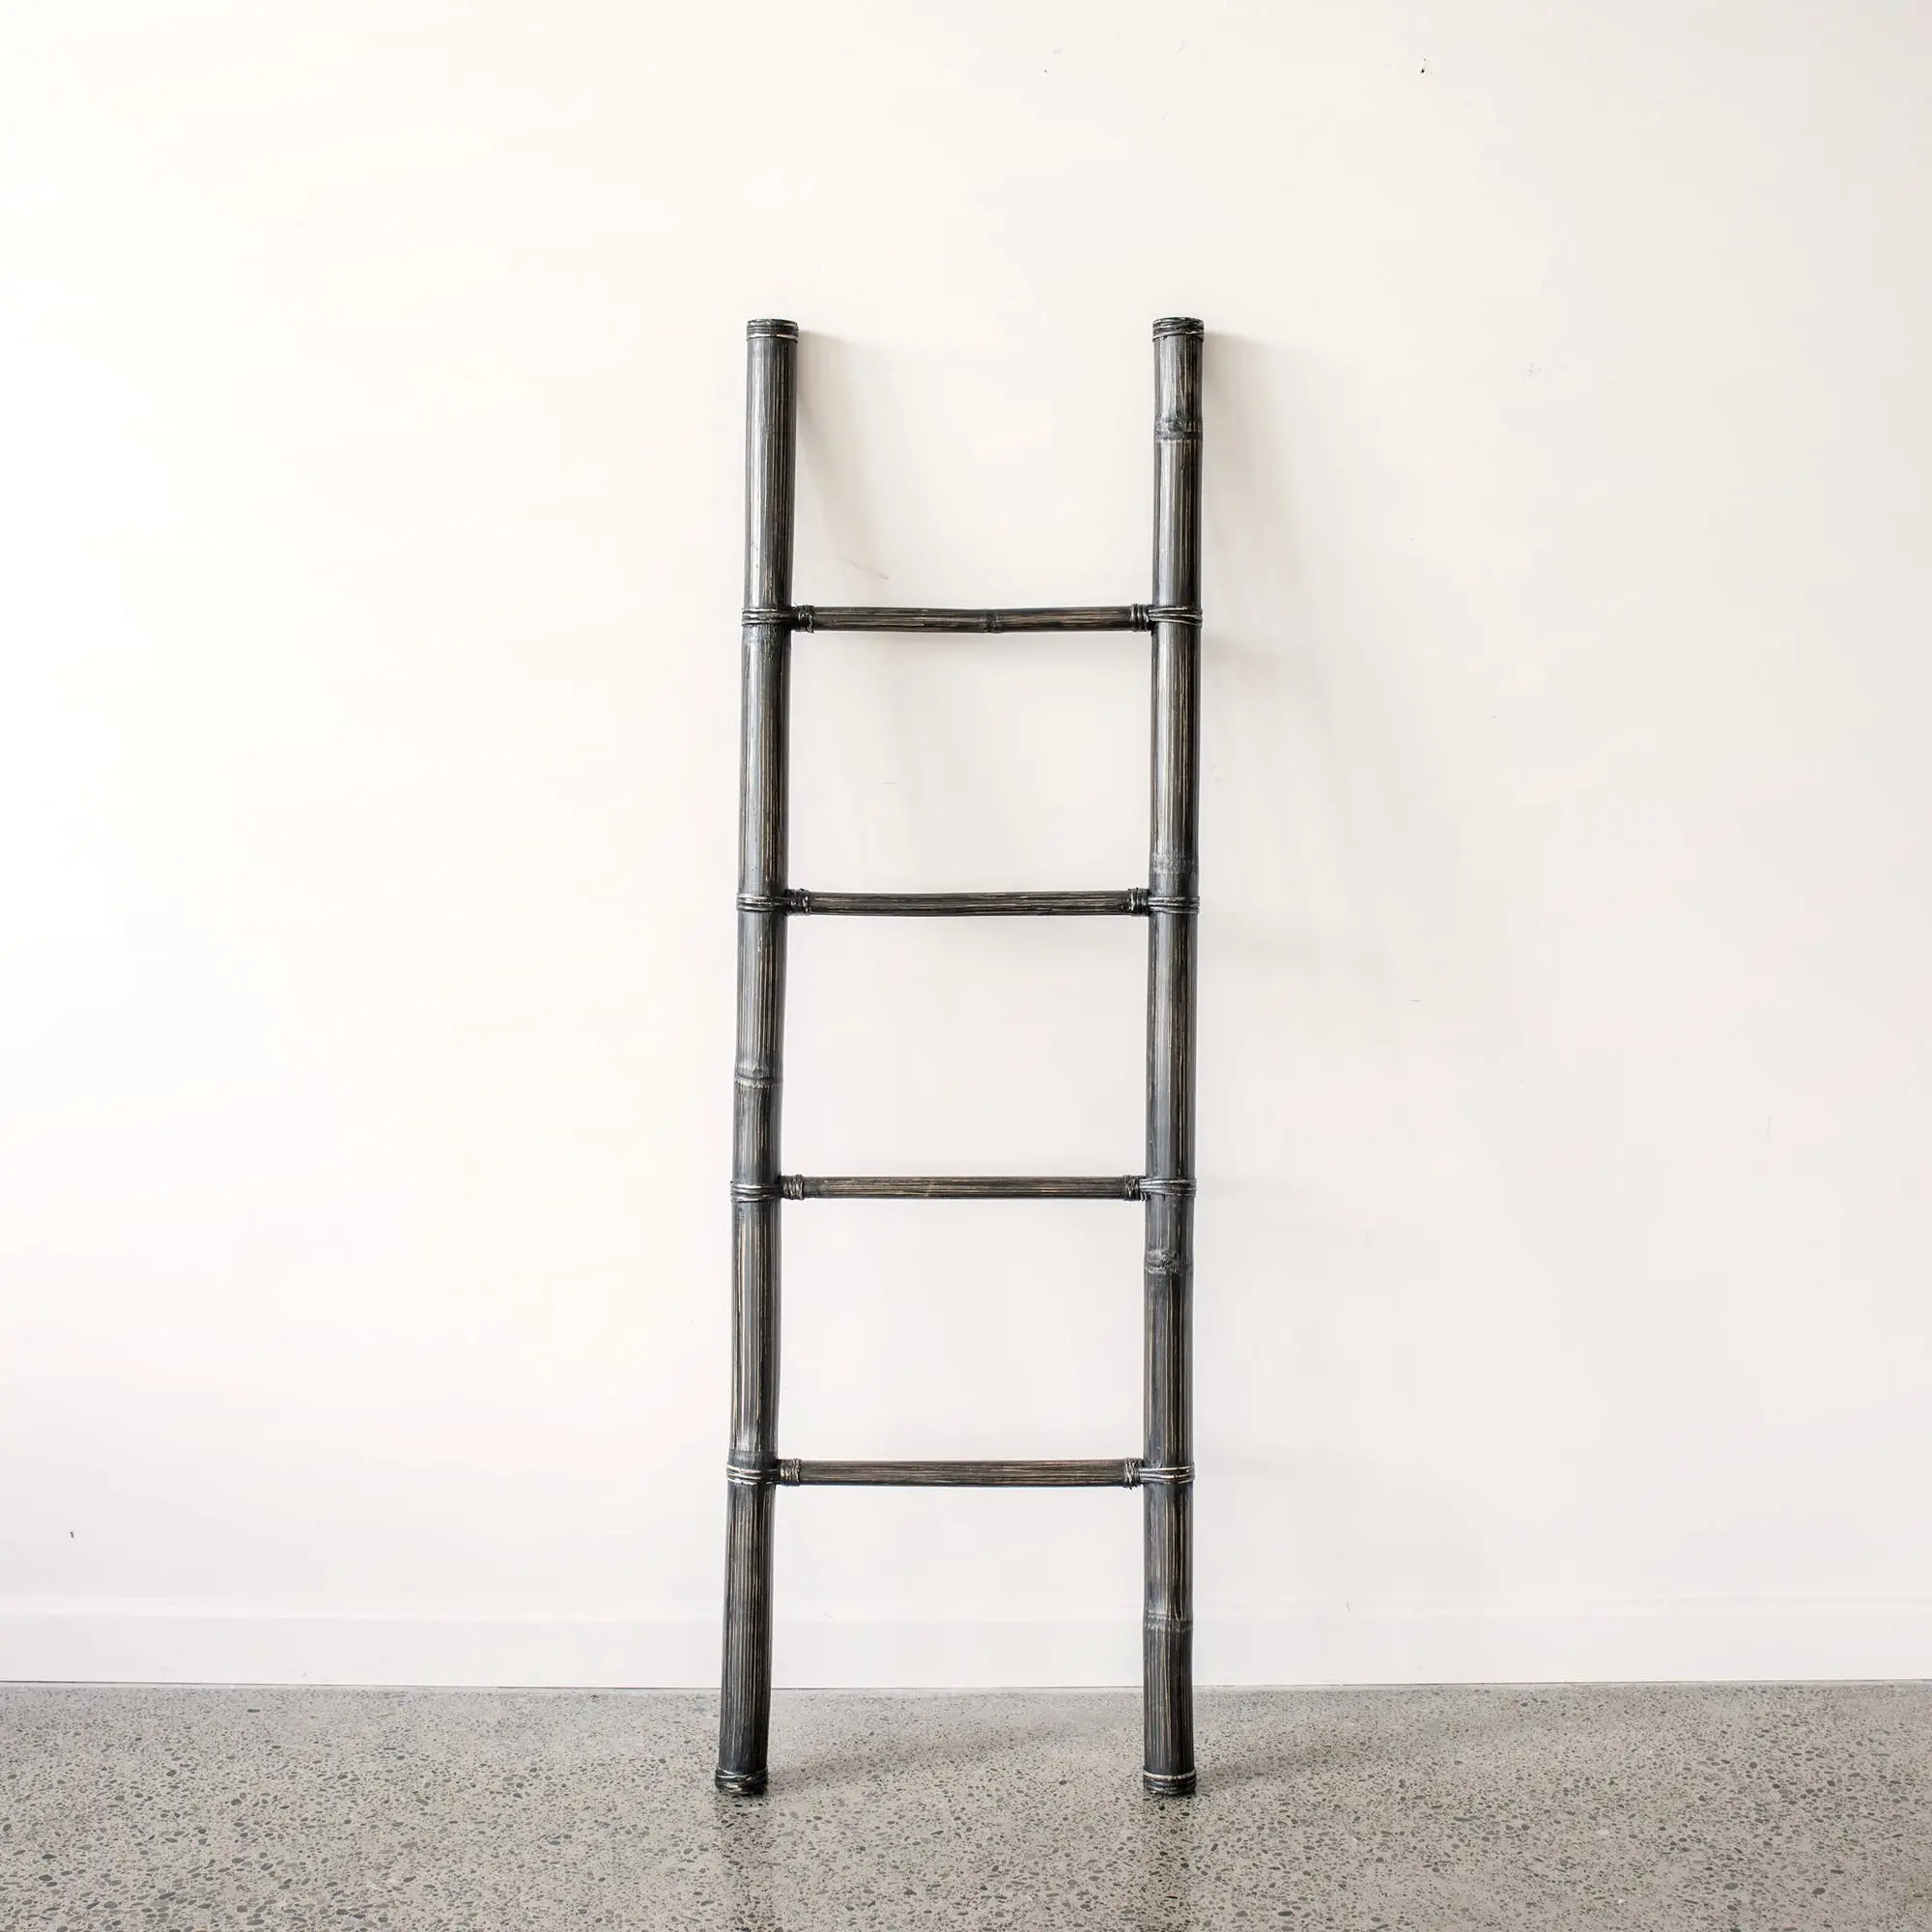 Construction strong sturdy straight black ladder and scaffolding parts bamboo ladders for hanging towels home use